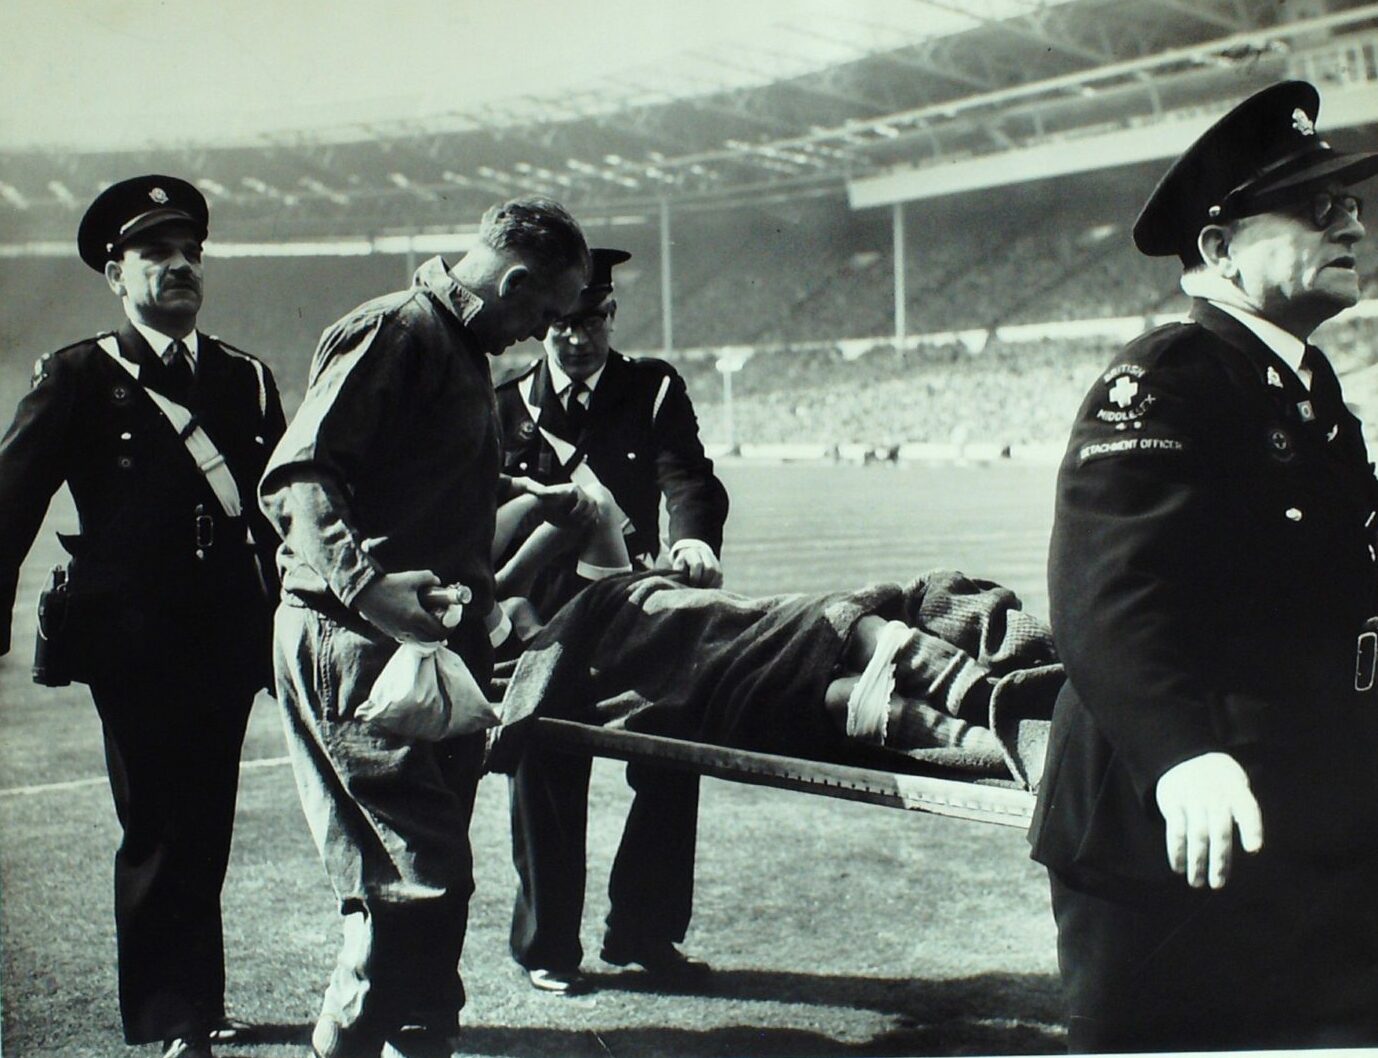 Caldow being carried off on a stretcher following the collision in the Auld Enemy clash in 1963.